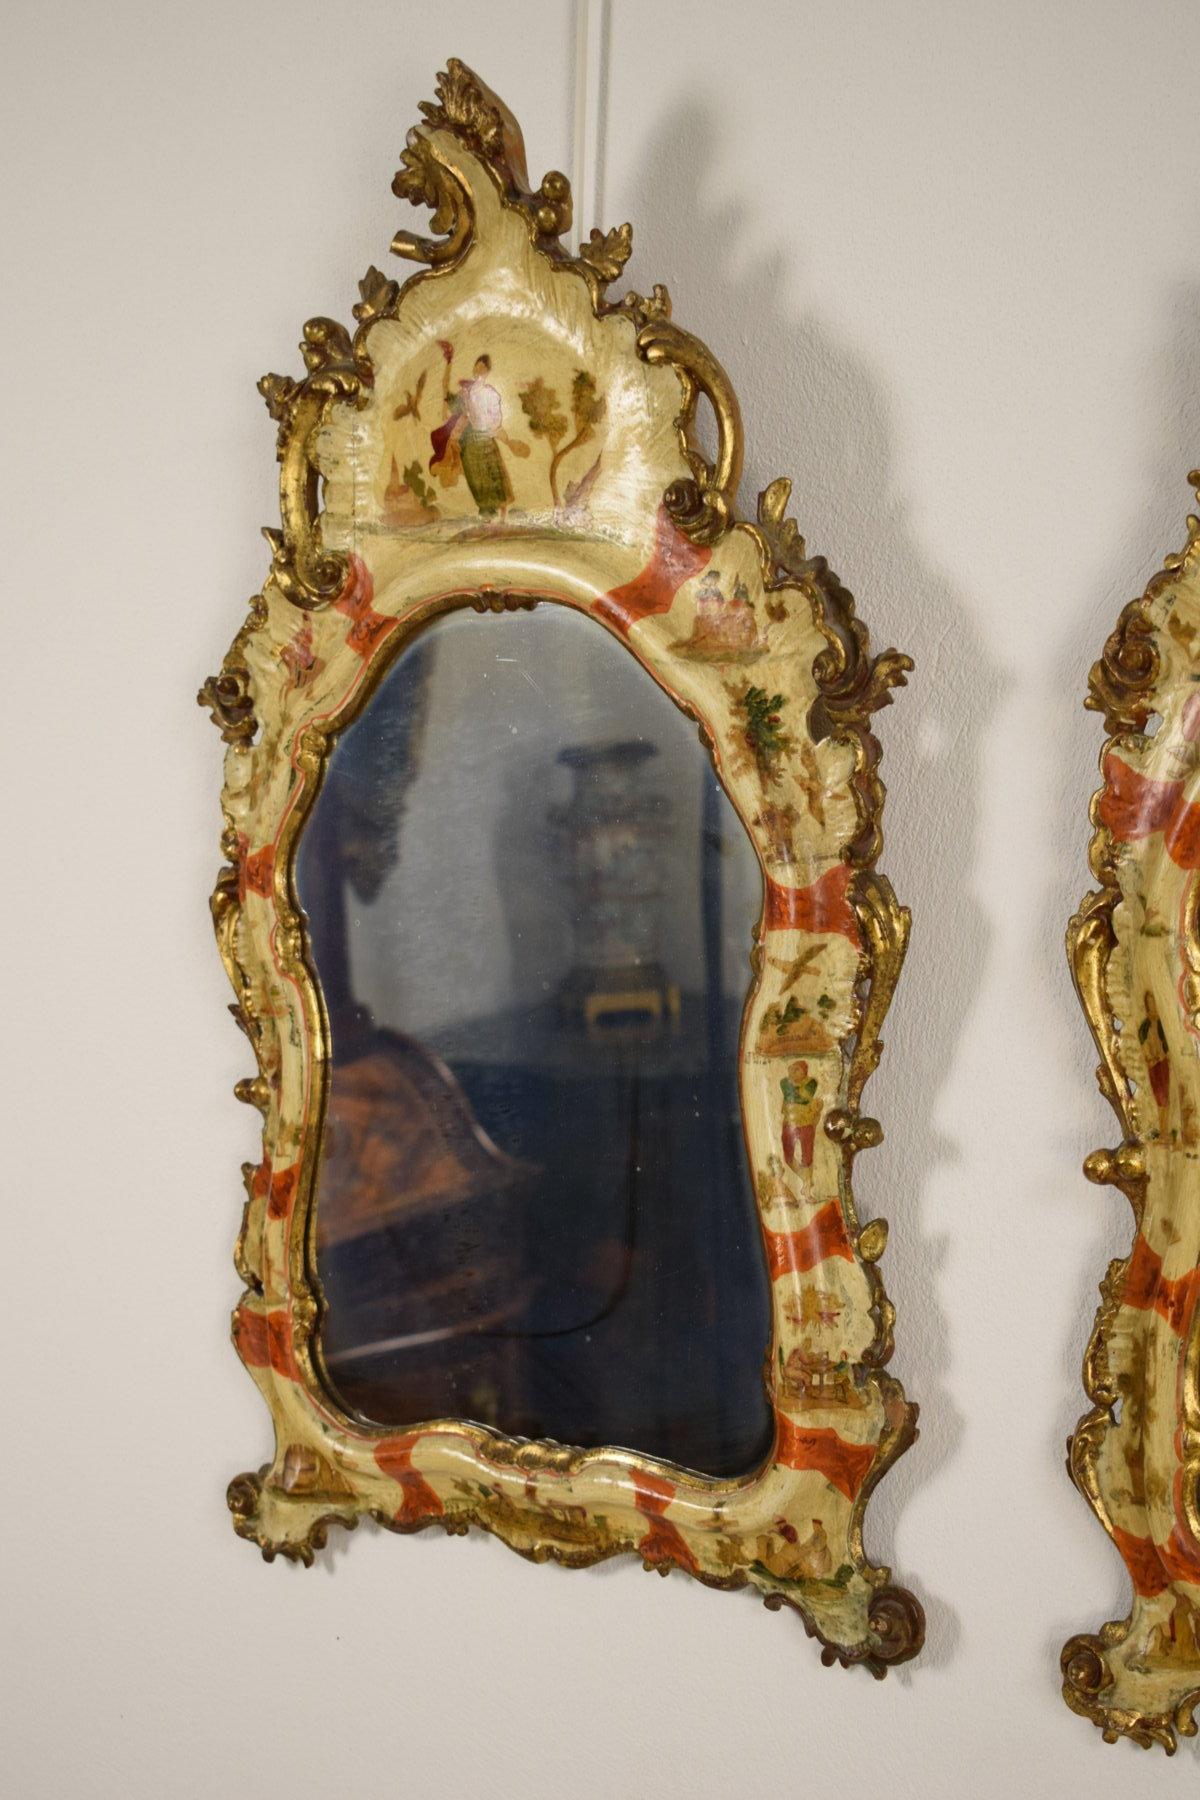 20th Century, Venice Arte Povera Lacquered Wood, Pair of Wall Mirrors  5